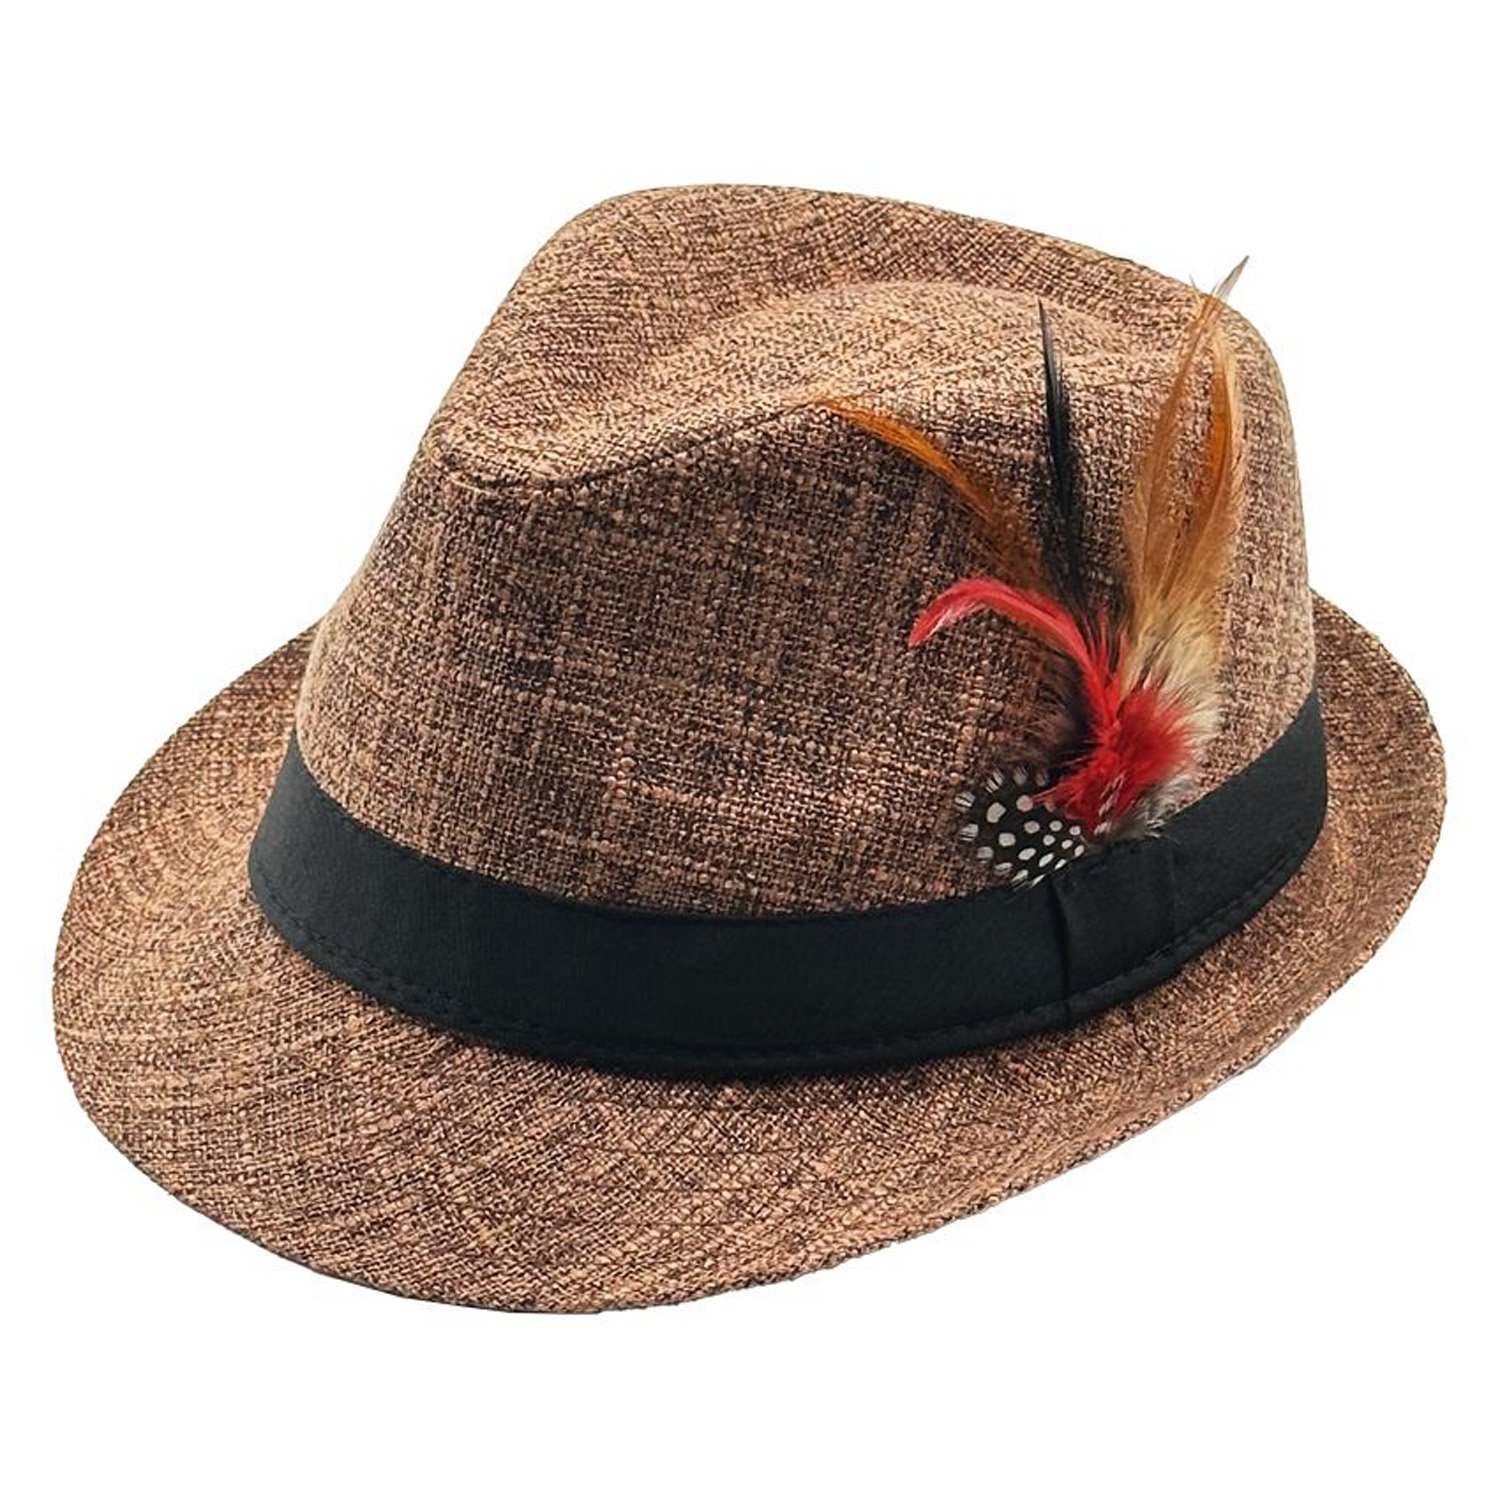 SILVERFEVER Fedora Hat with Feathers Gatsby Holiday Octoberfast Bavarian  Alpine Trilby Dress Up Hats 